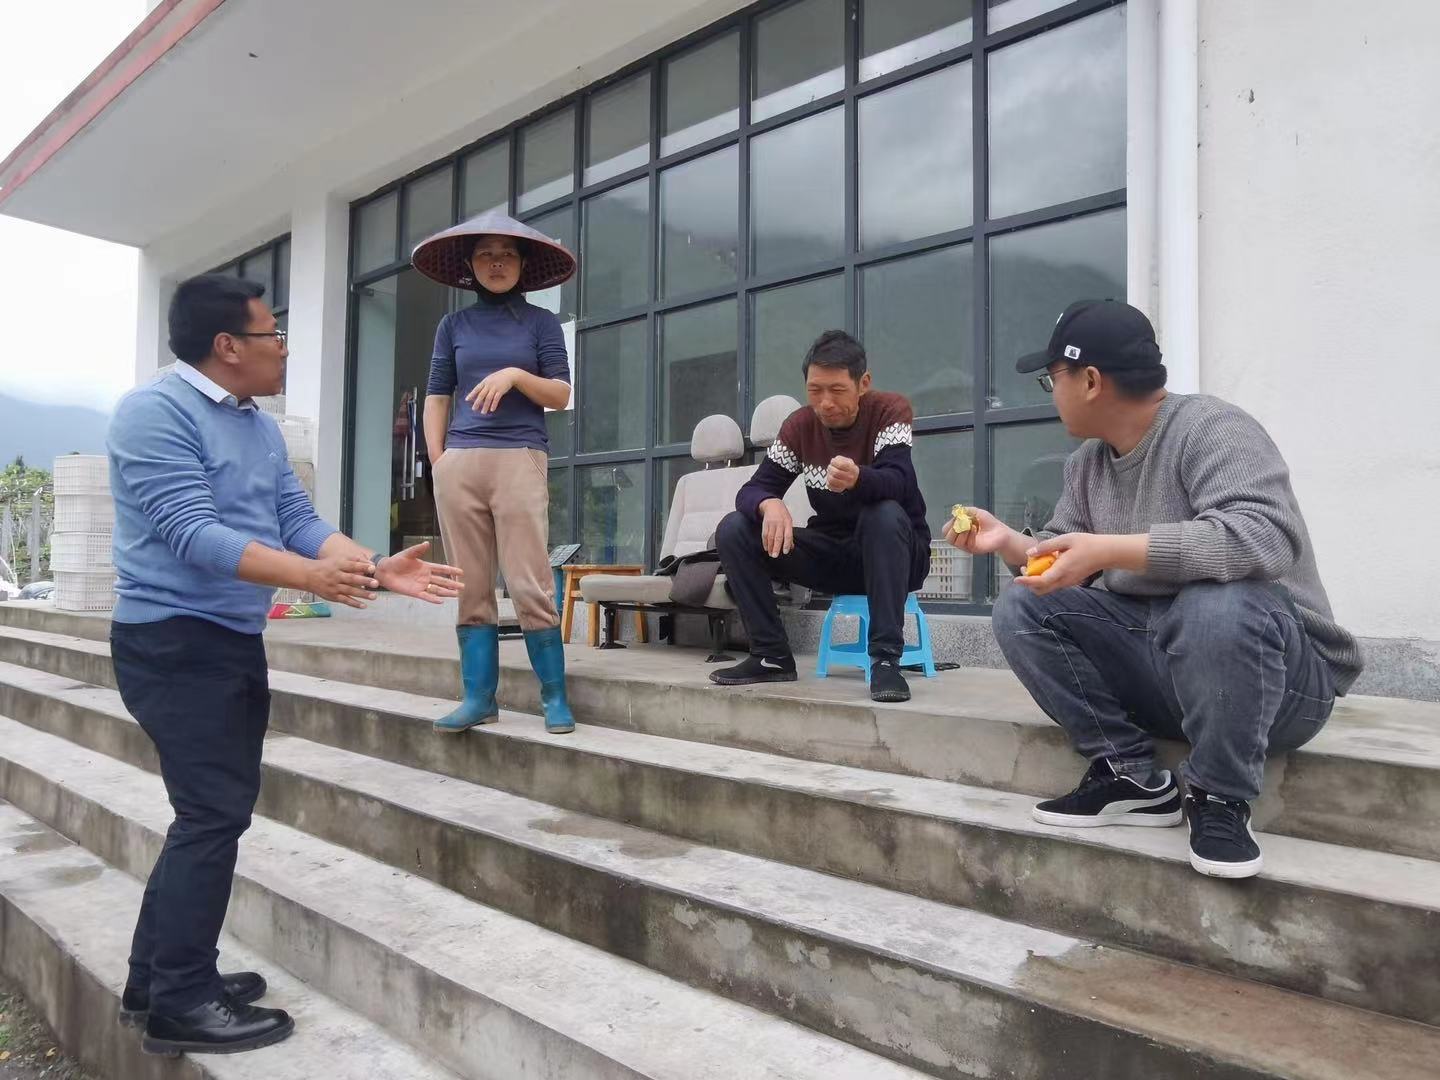 Xianfeng Wang (first from the right) is tasting fruits with his partners in Tibet